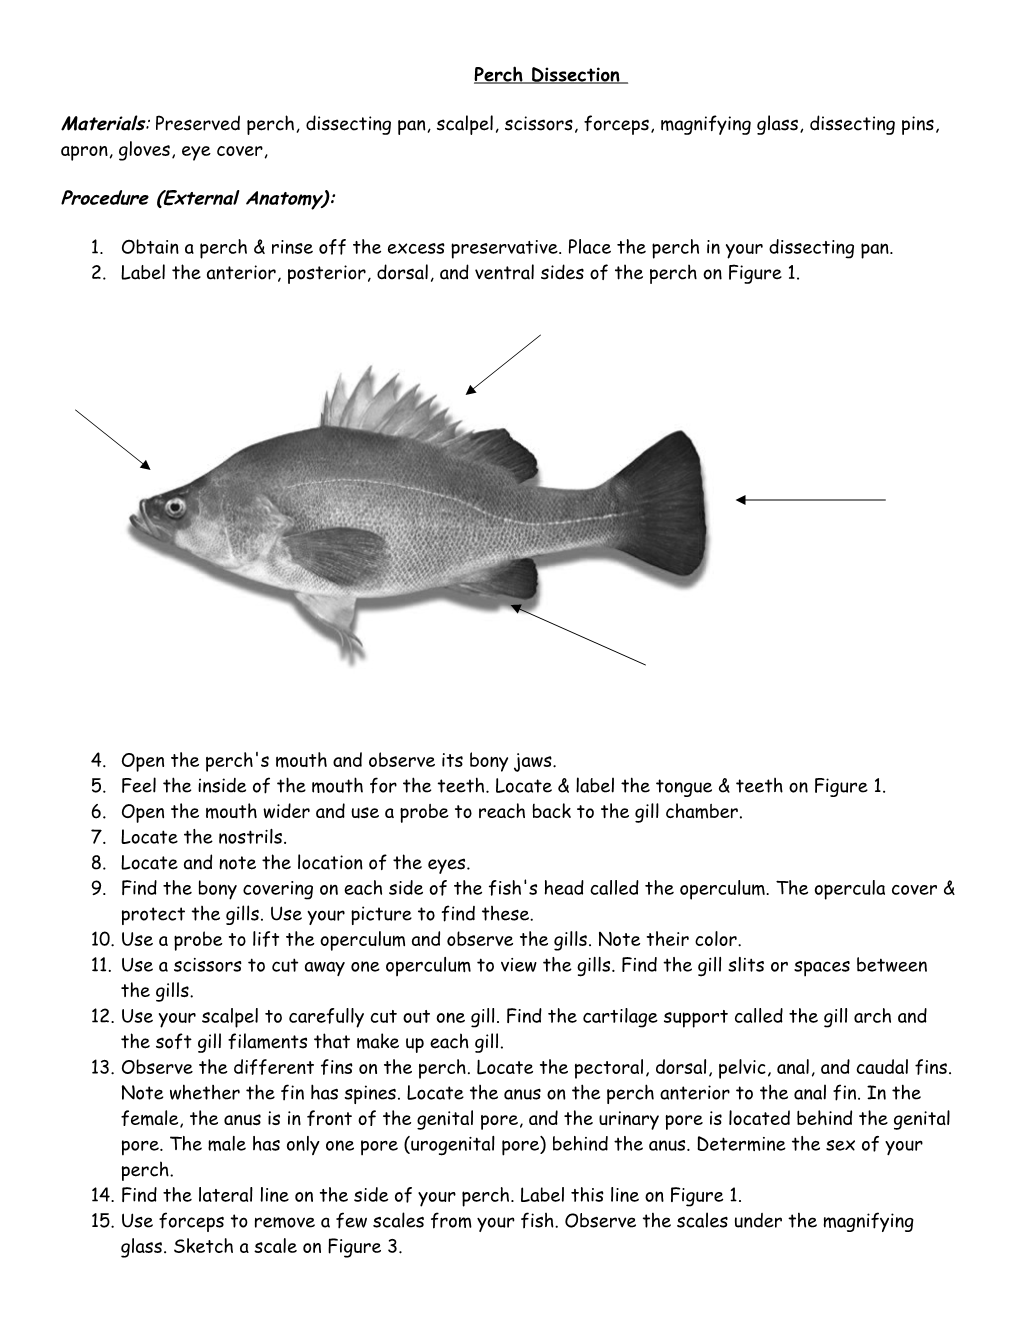 4. Open the Perch's Mouth and Observe Its Bony Jaws